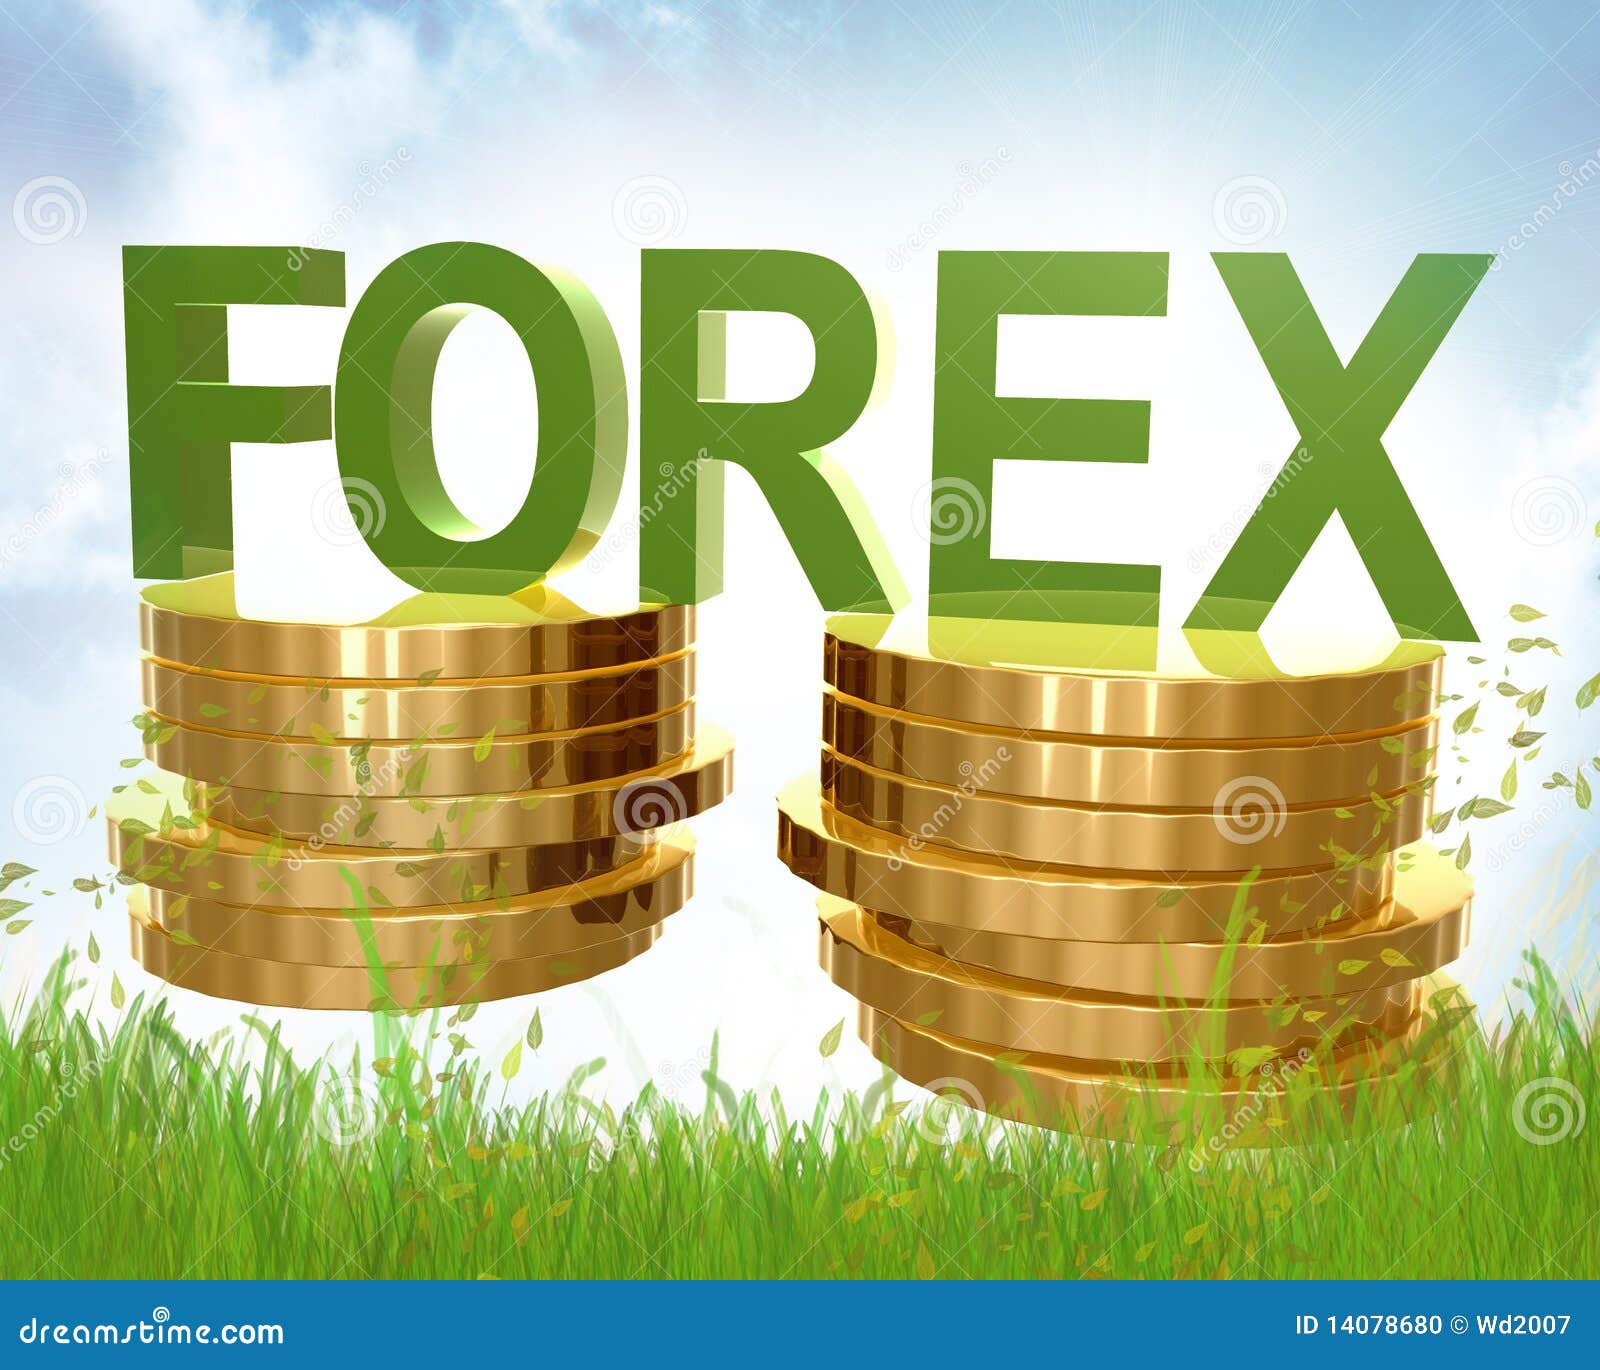 Gold trading forex brokers